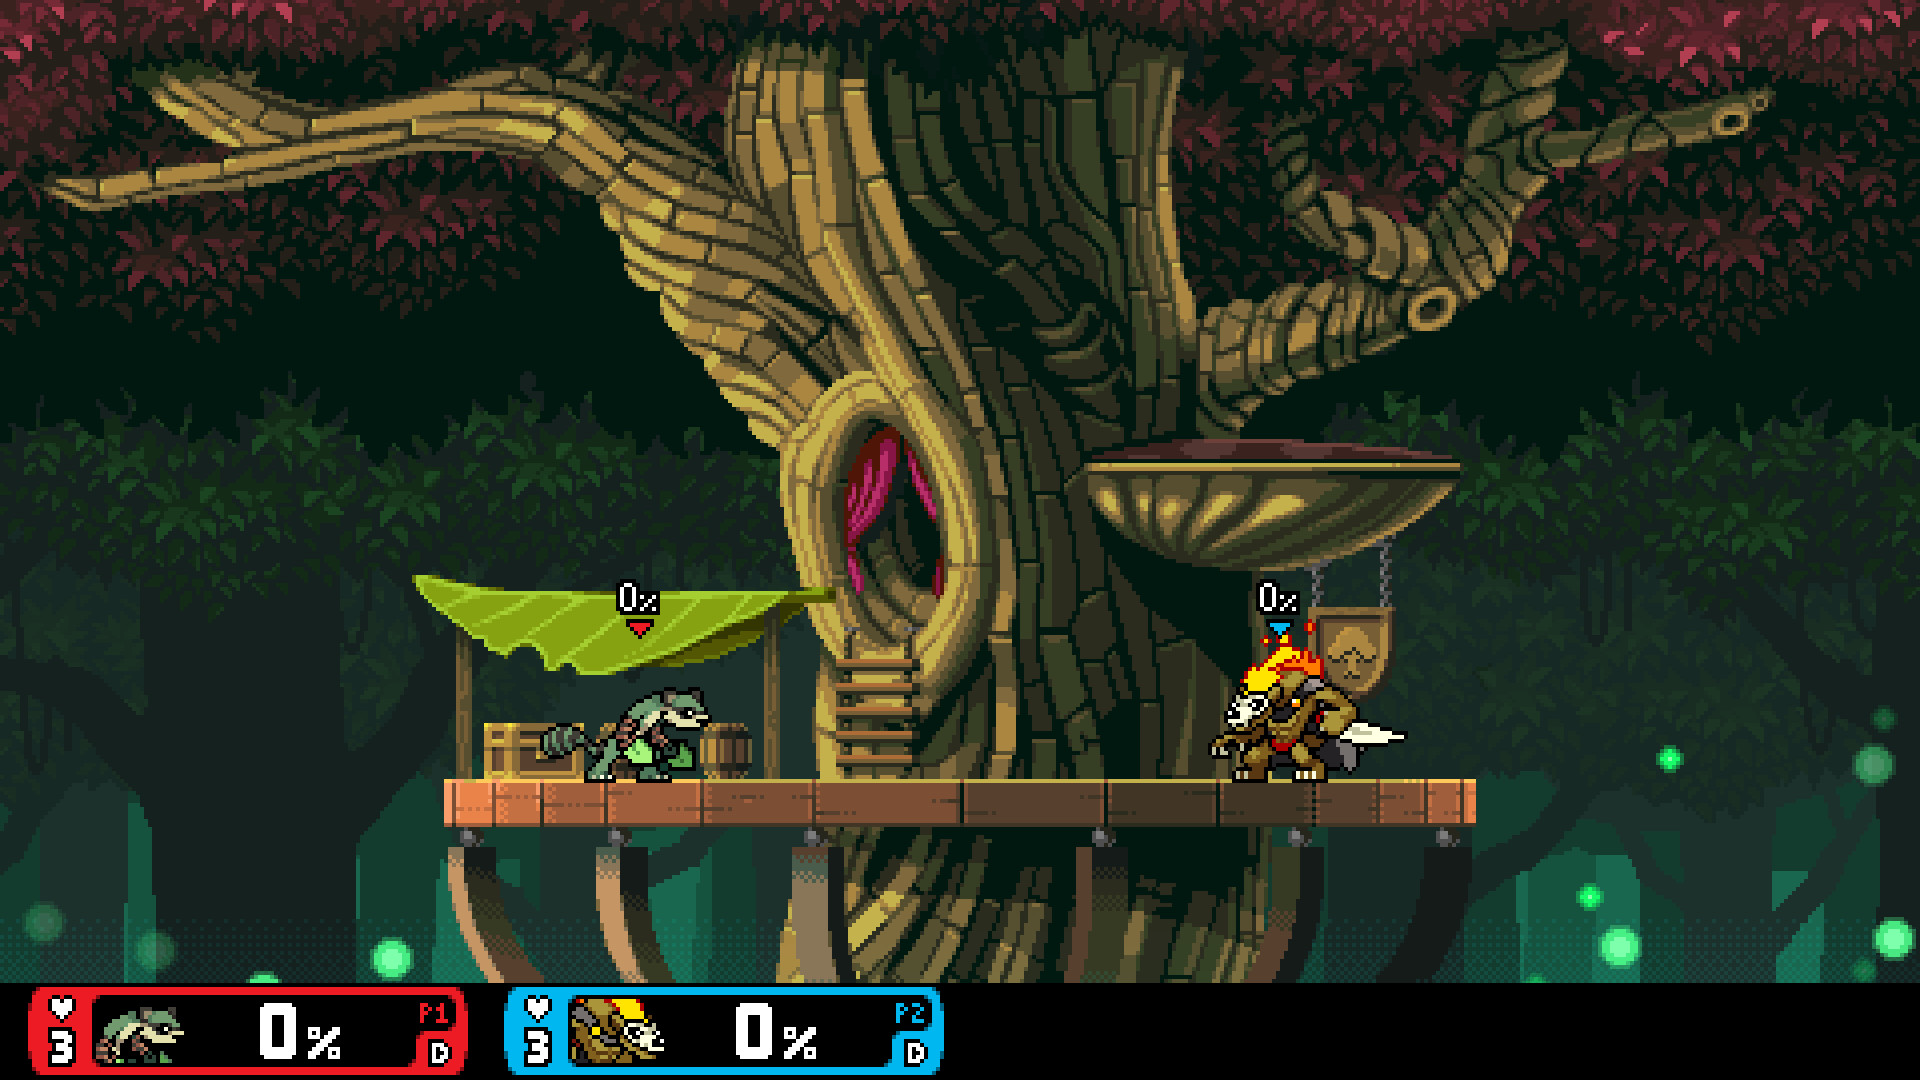 rivals of aether free pc download